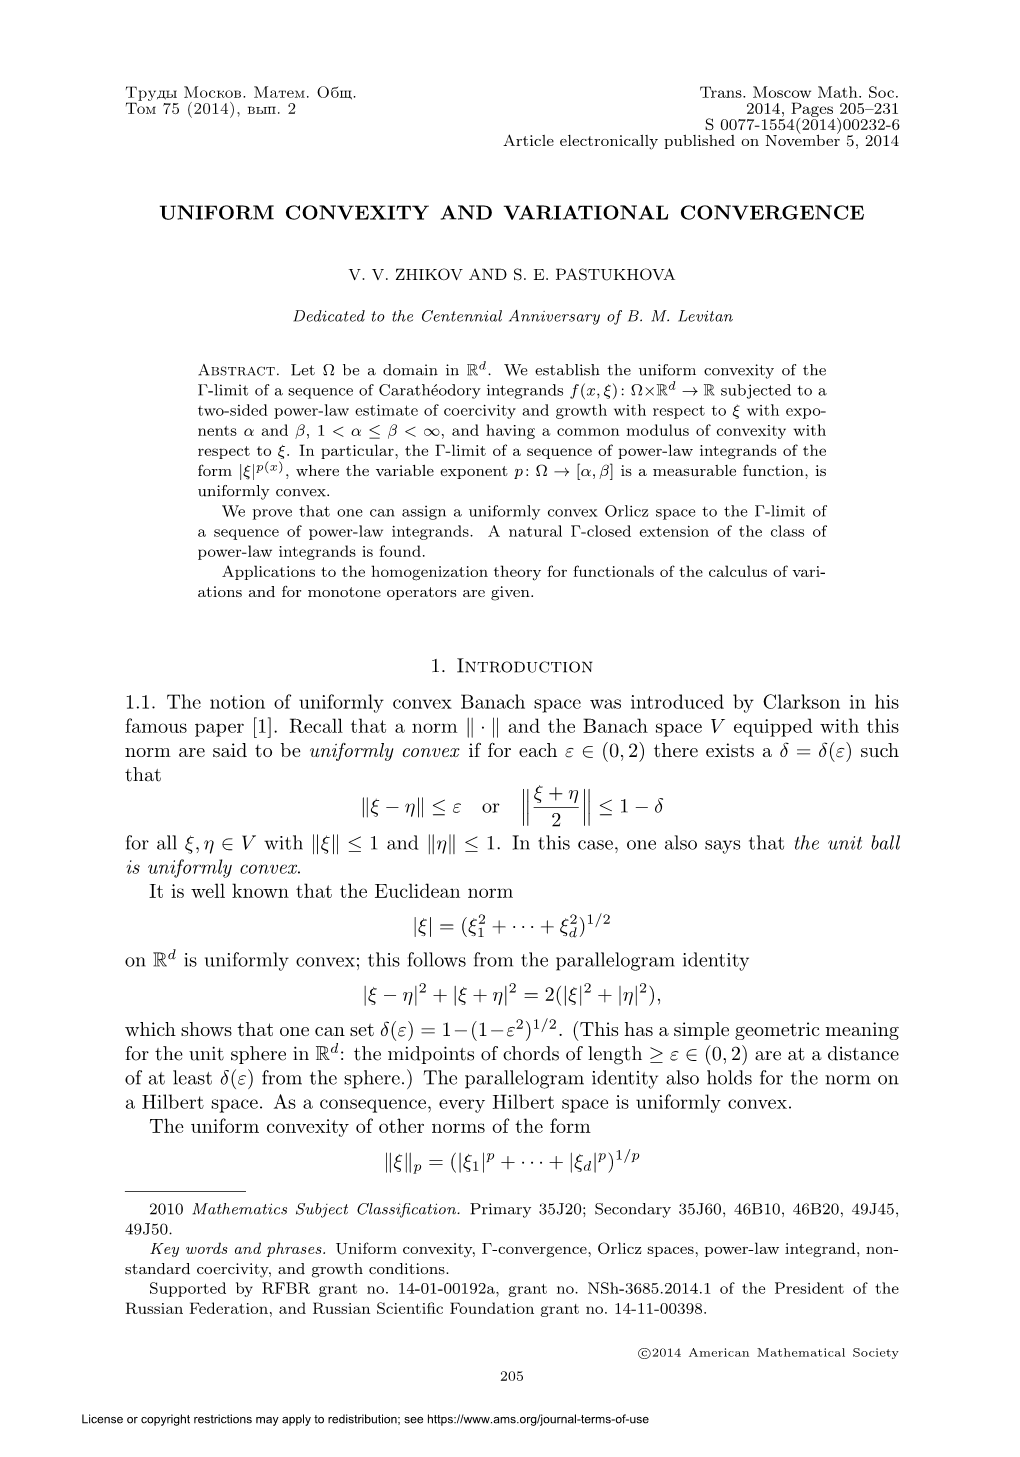 Uniform Convexity and Variational Convergence